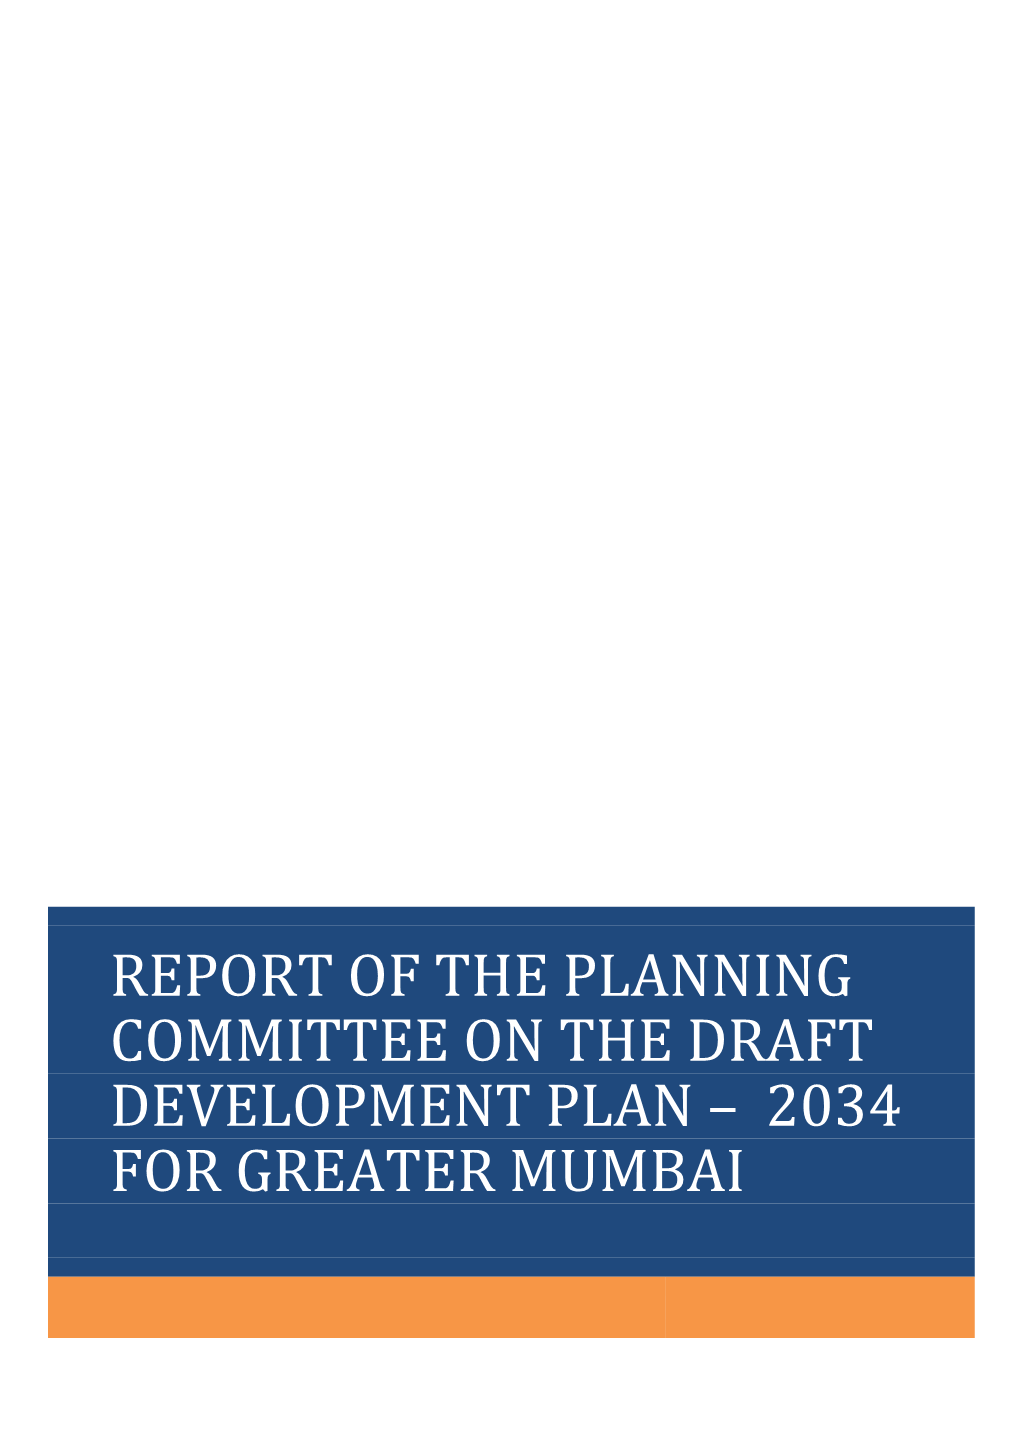 Report of the Planning Committee on the Draft Development Plan – 2034 for Greater Mumbai